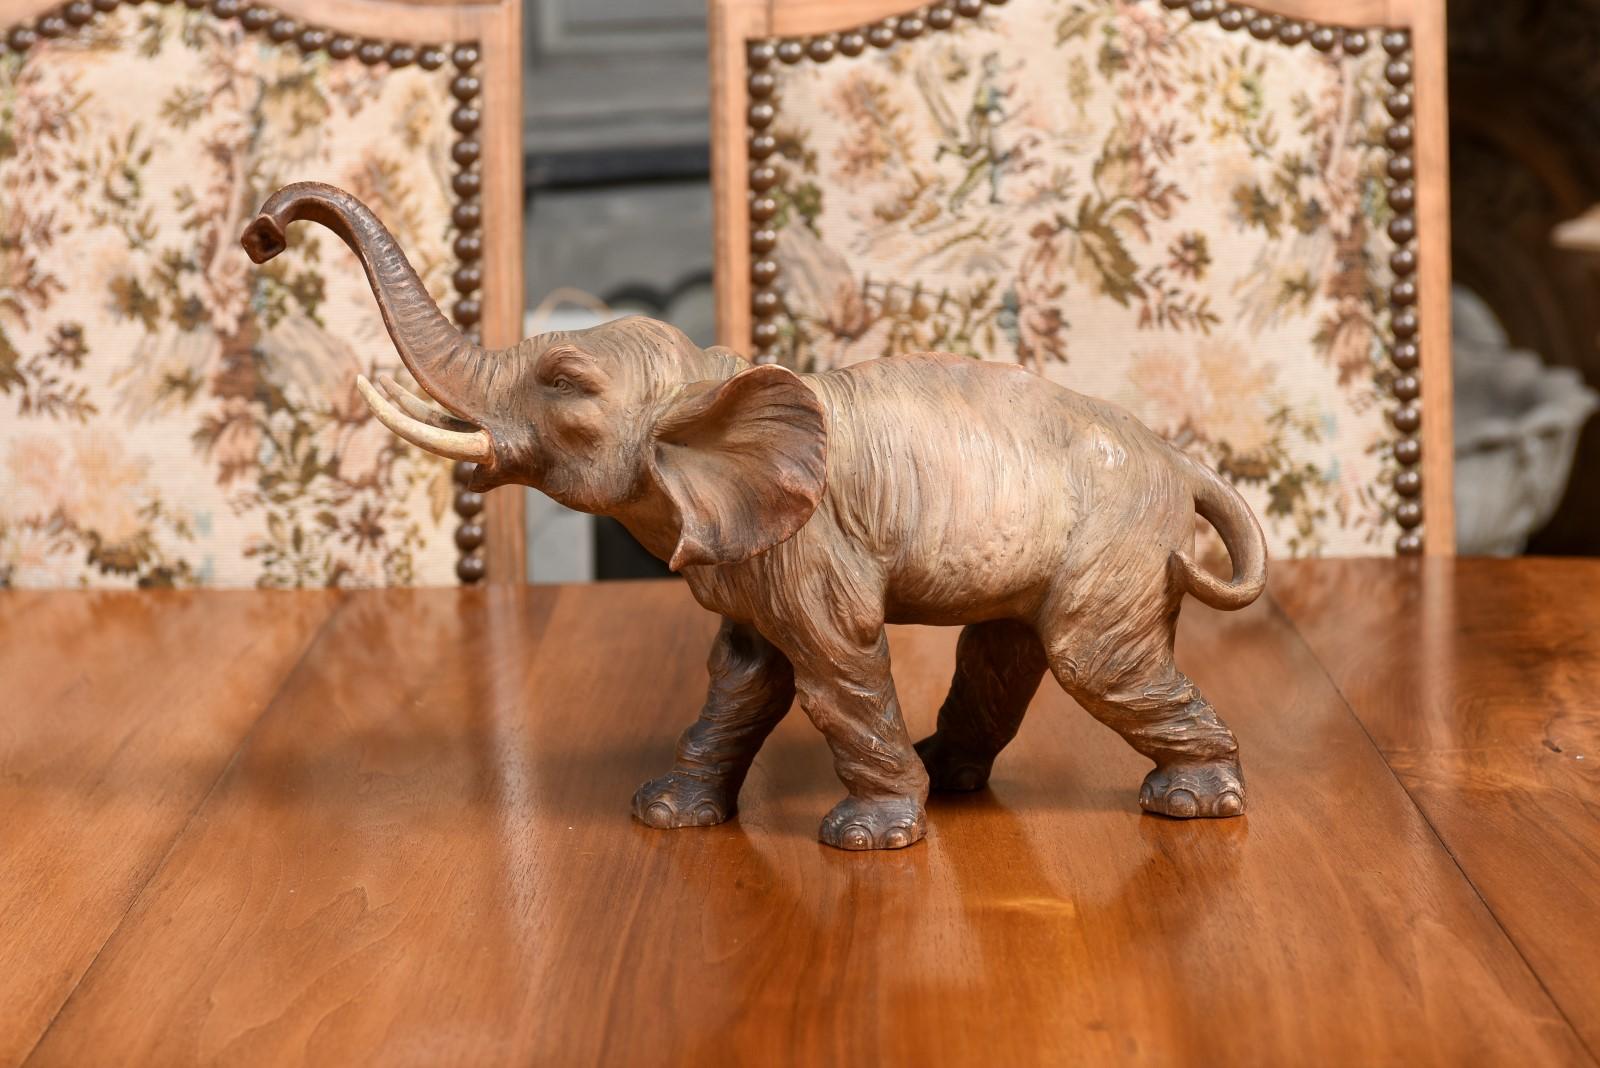 French 19th Century Terracotta Sculpture Depicting a Walking Asian Elephant 4